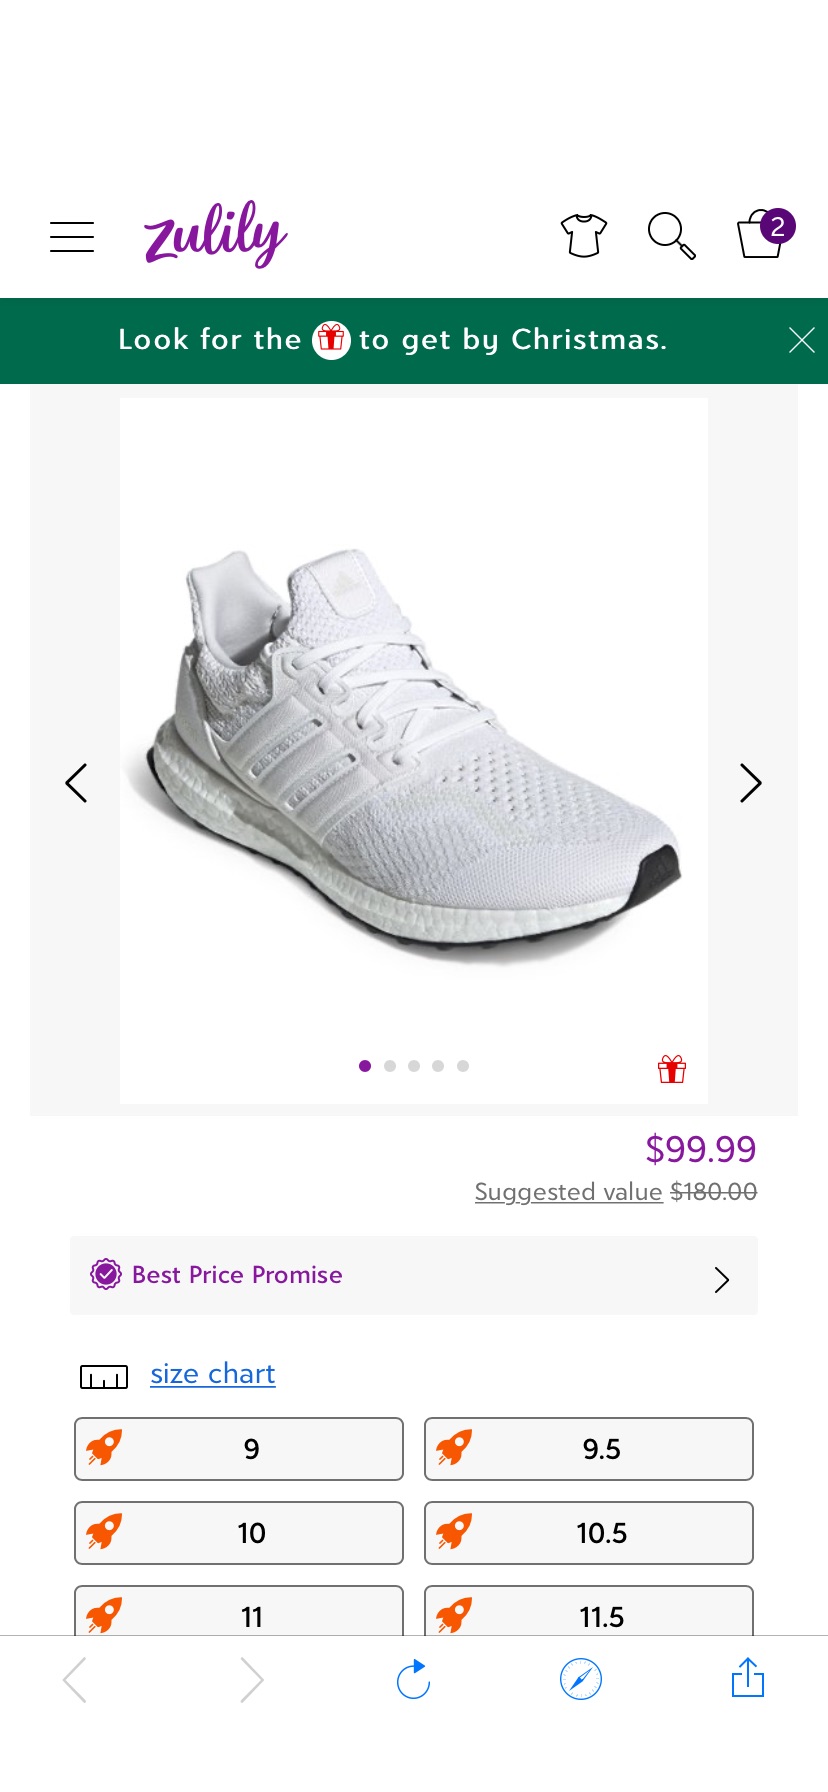 adidas Cloud White & Core White Ultraboost 5.0 DNA Running Shoe - Men | Best Price and Reviews | Zulily鞋子